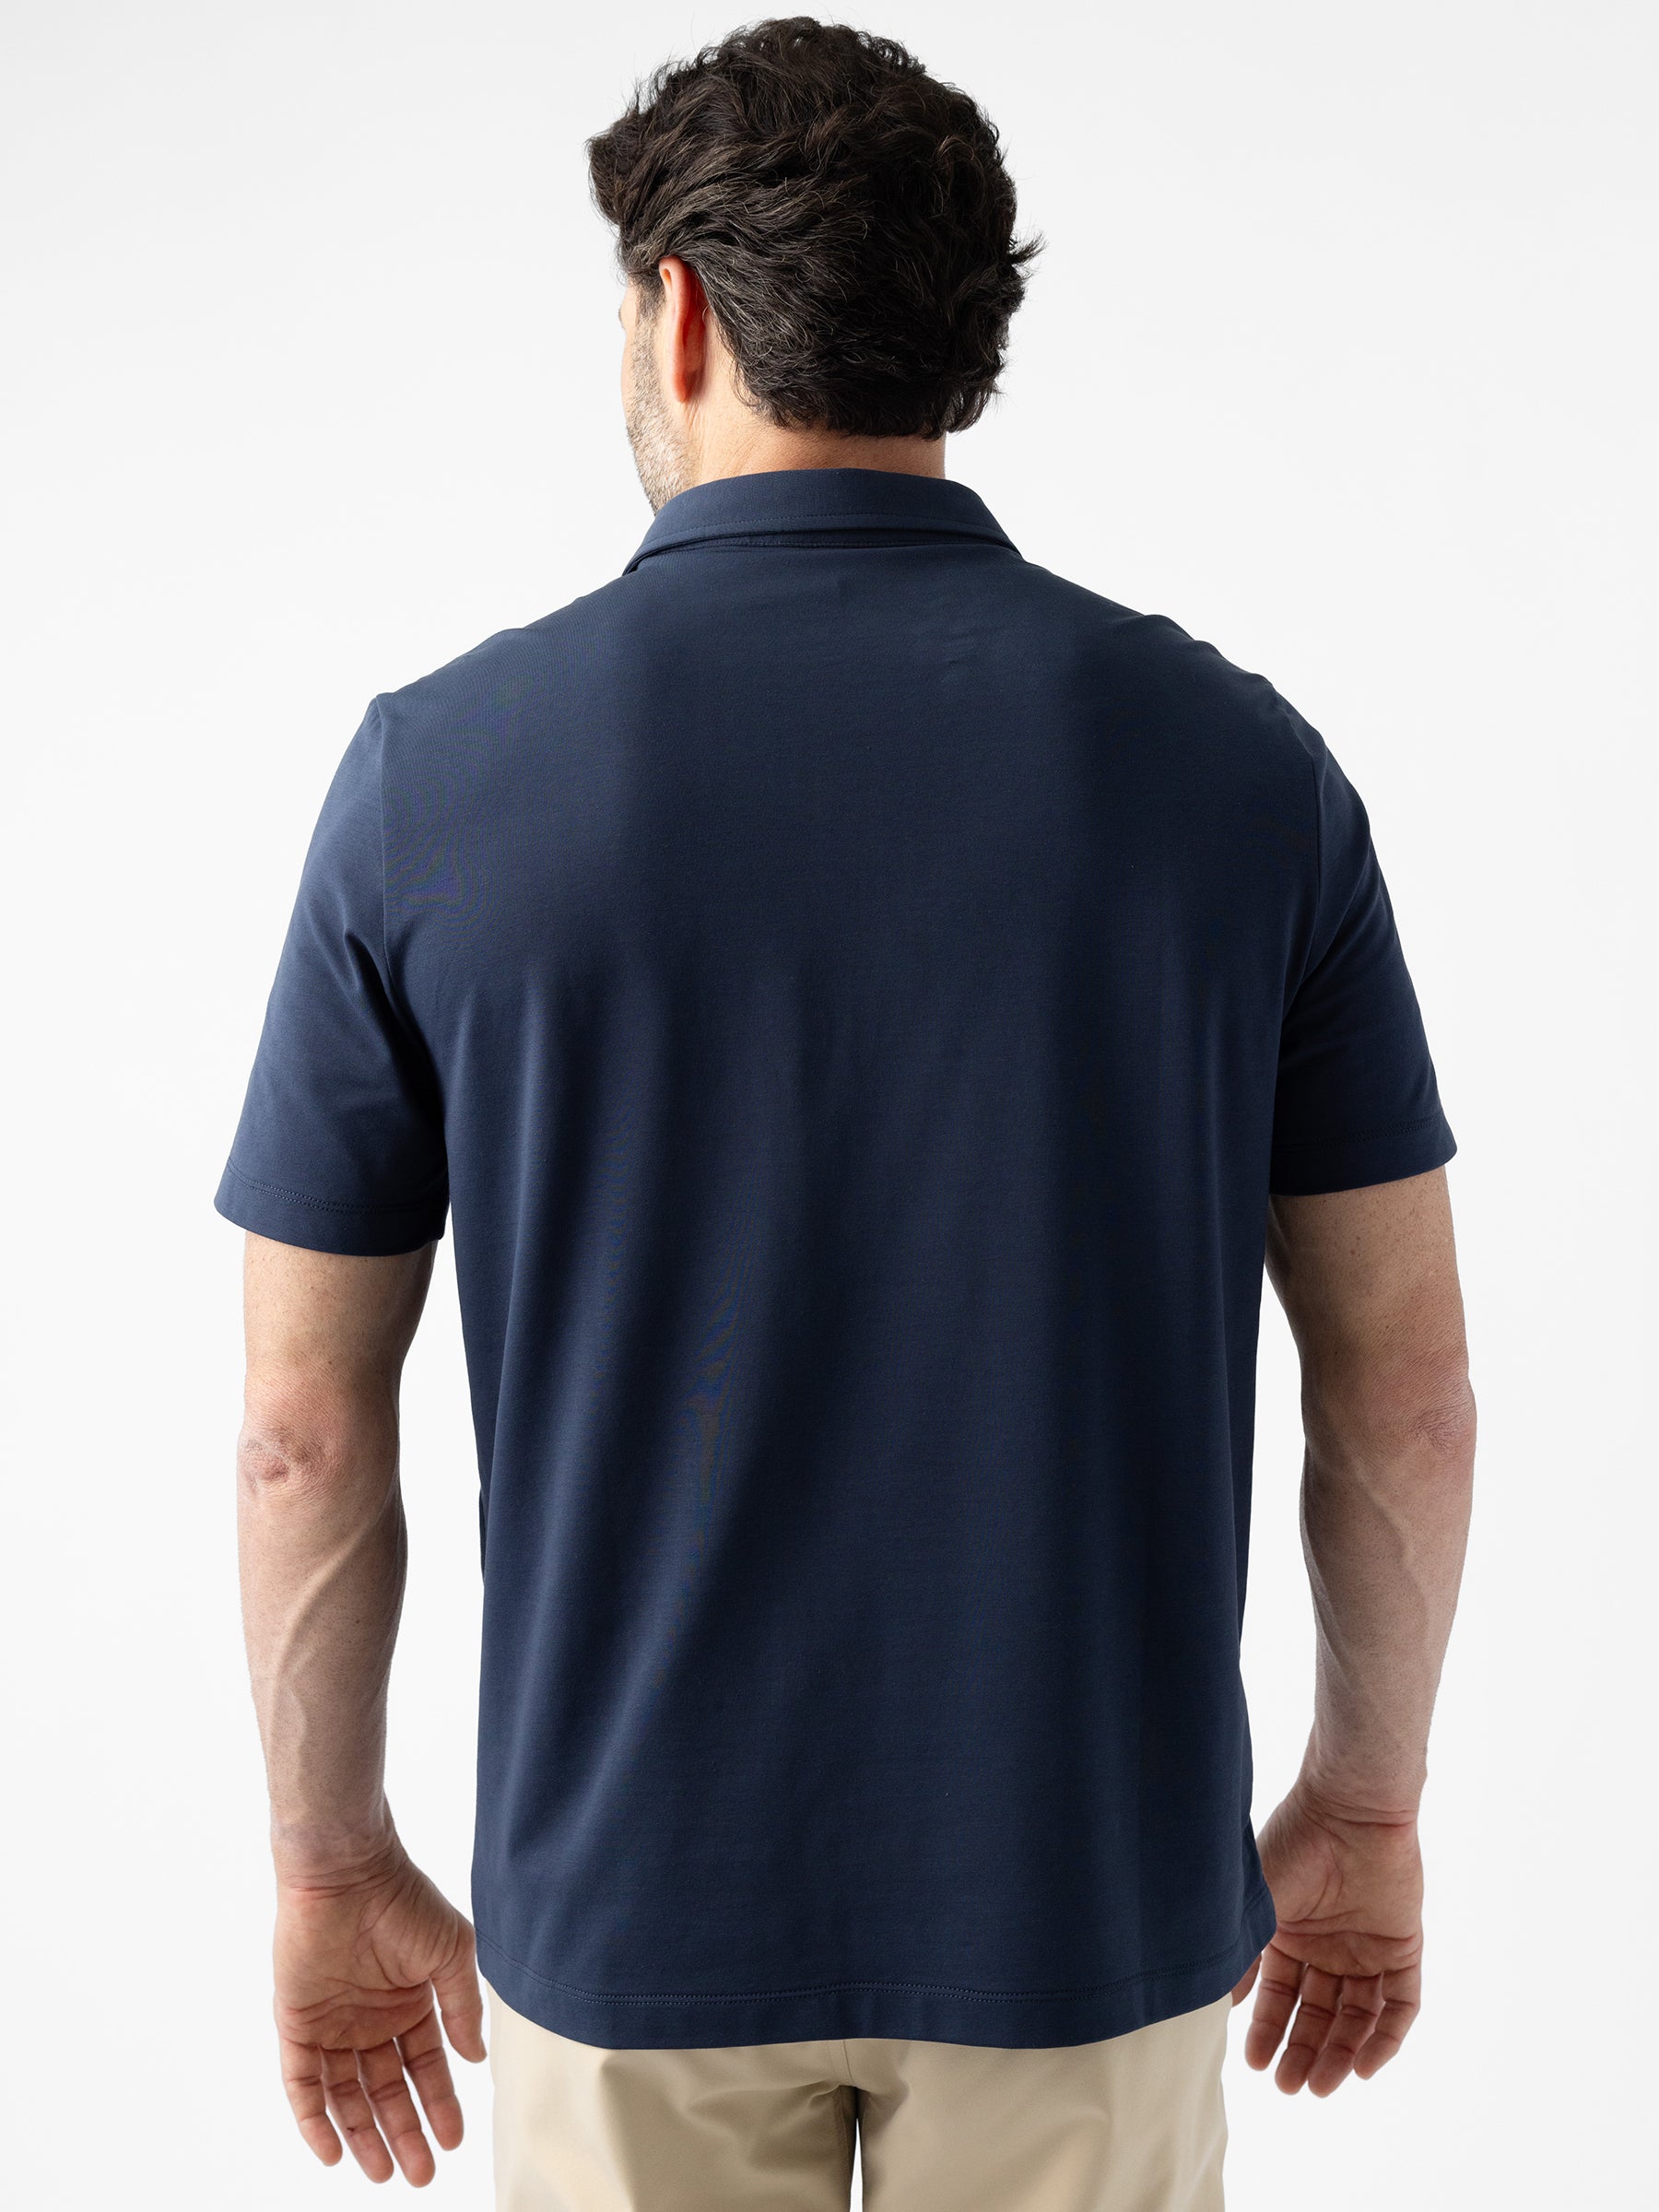 A man with short dark hair faces away while wearing Cozy Earth's Men's Everyday Polo in navy blue and beige pants, standing against a plain white background. |Color:Eclipse